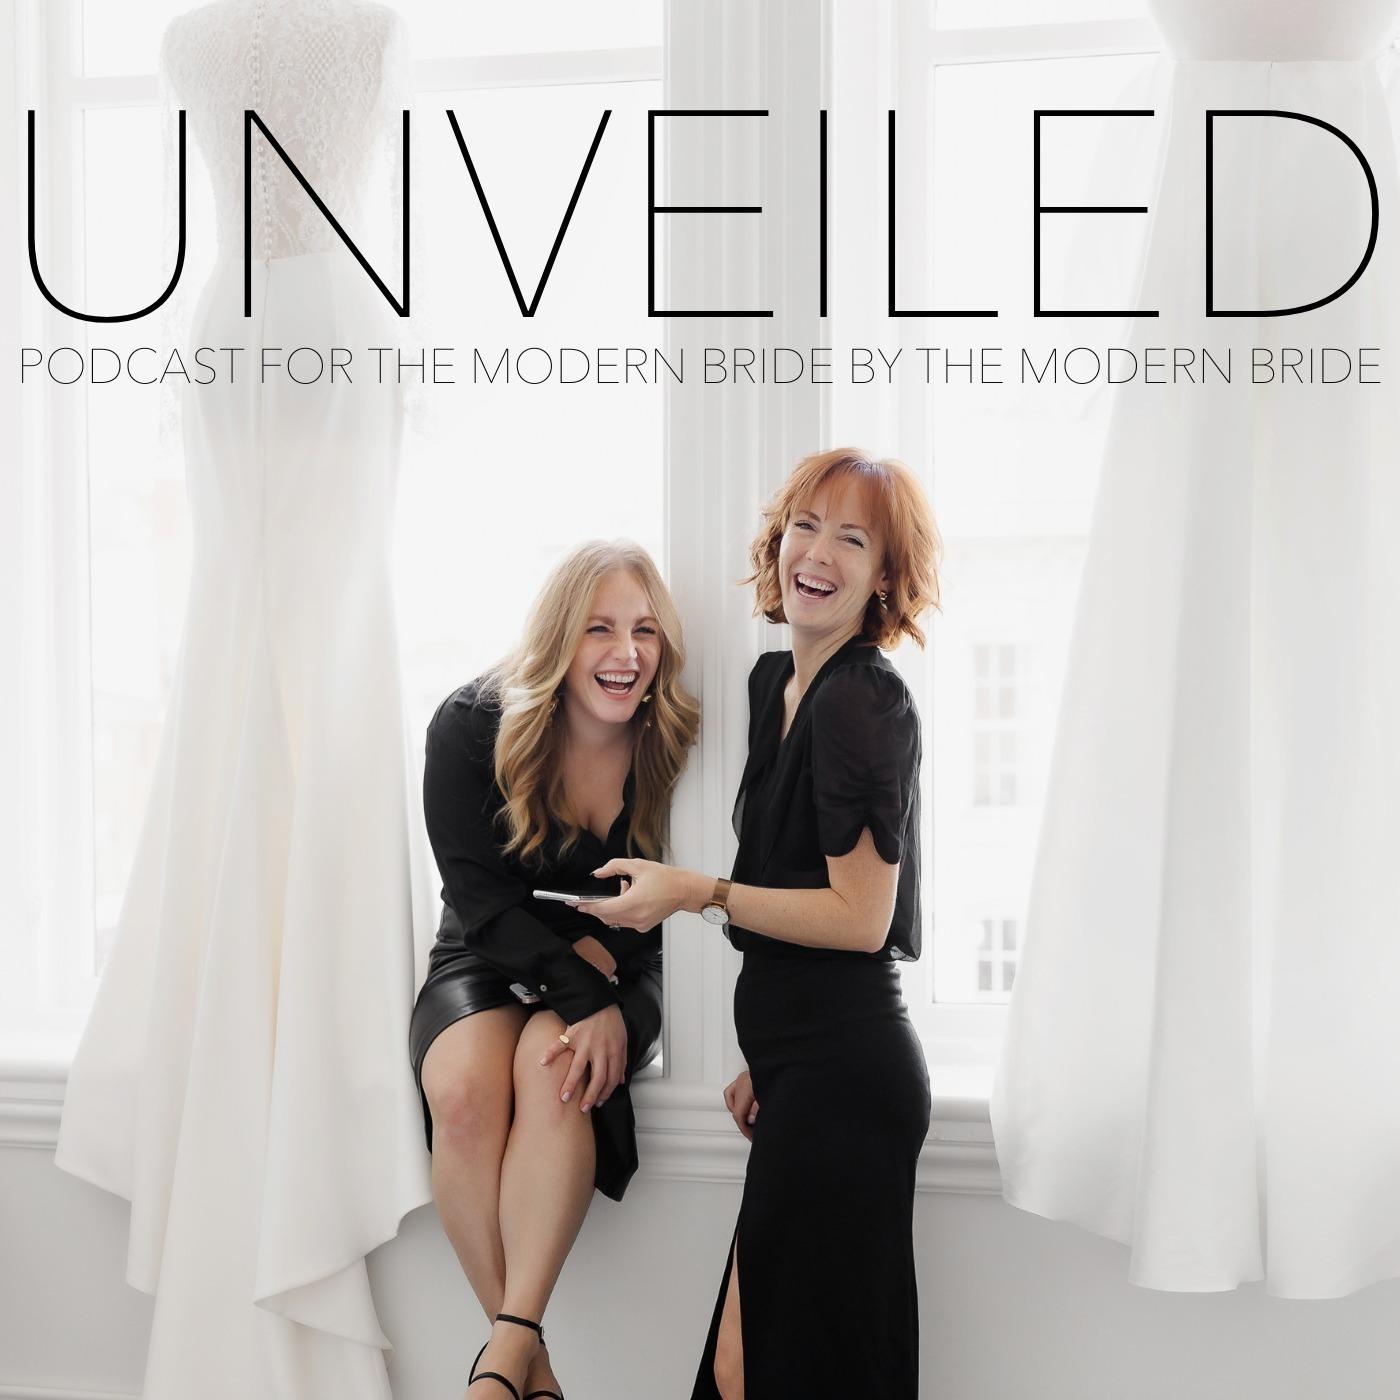 UNVEILED: For the modern bride by The Modern Bride